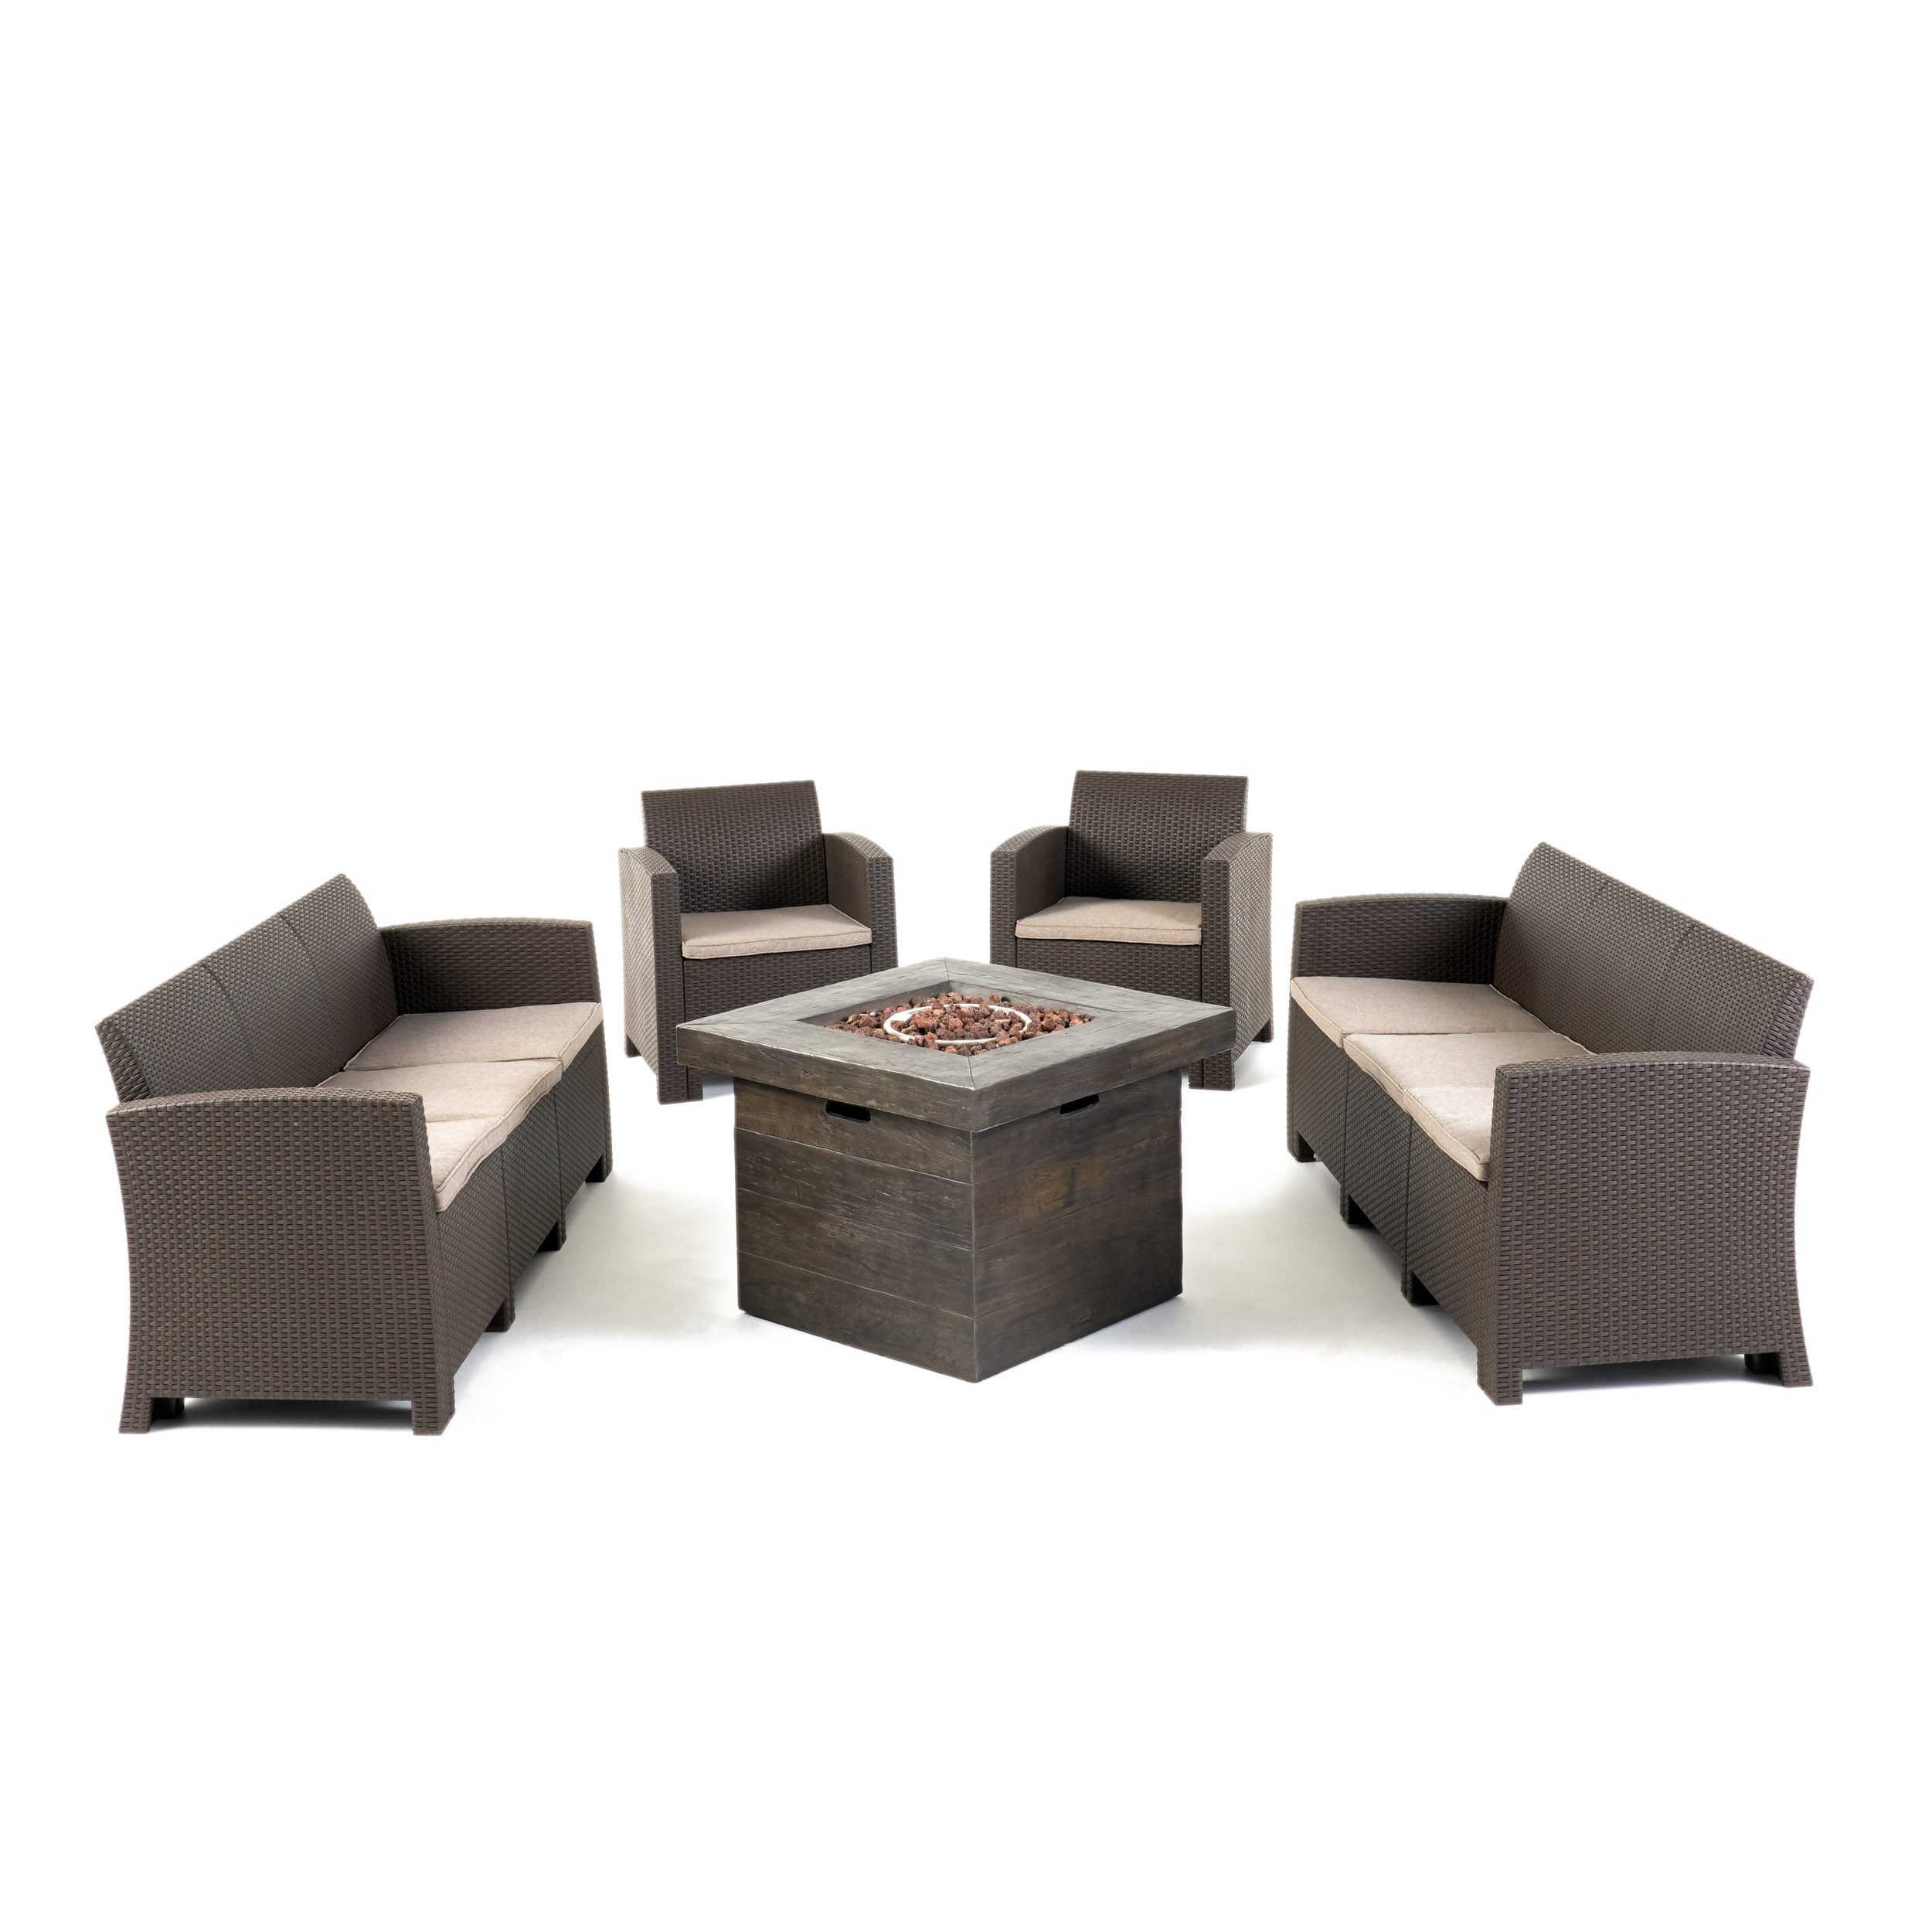 Irwin Outdoor Wicker Chat Set With Fire Pit - Brown + Mixed Biege + Brown